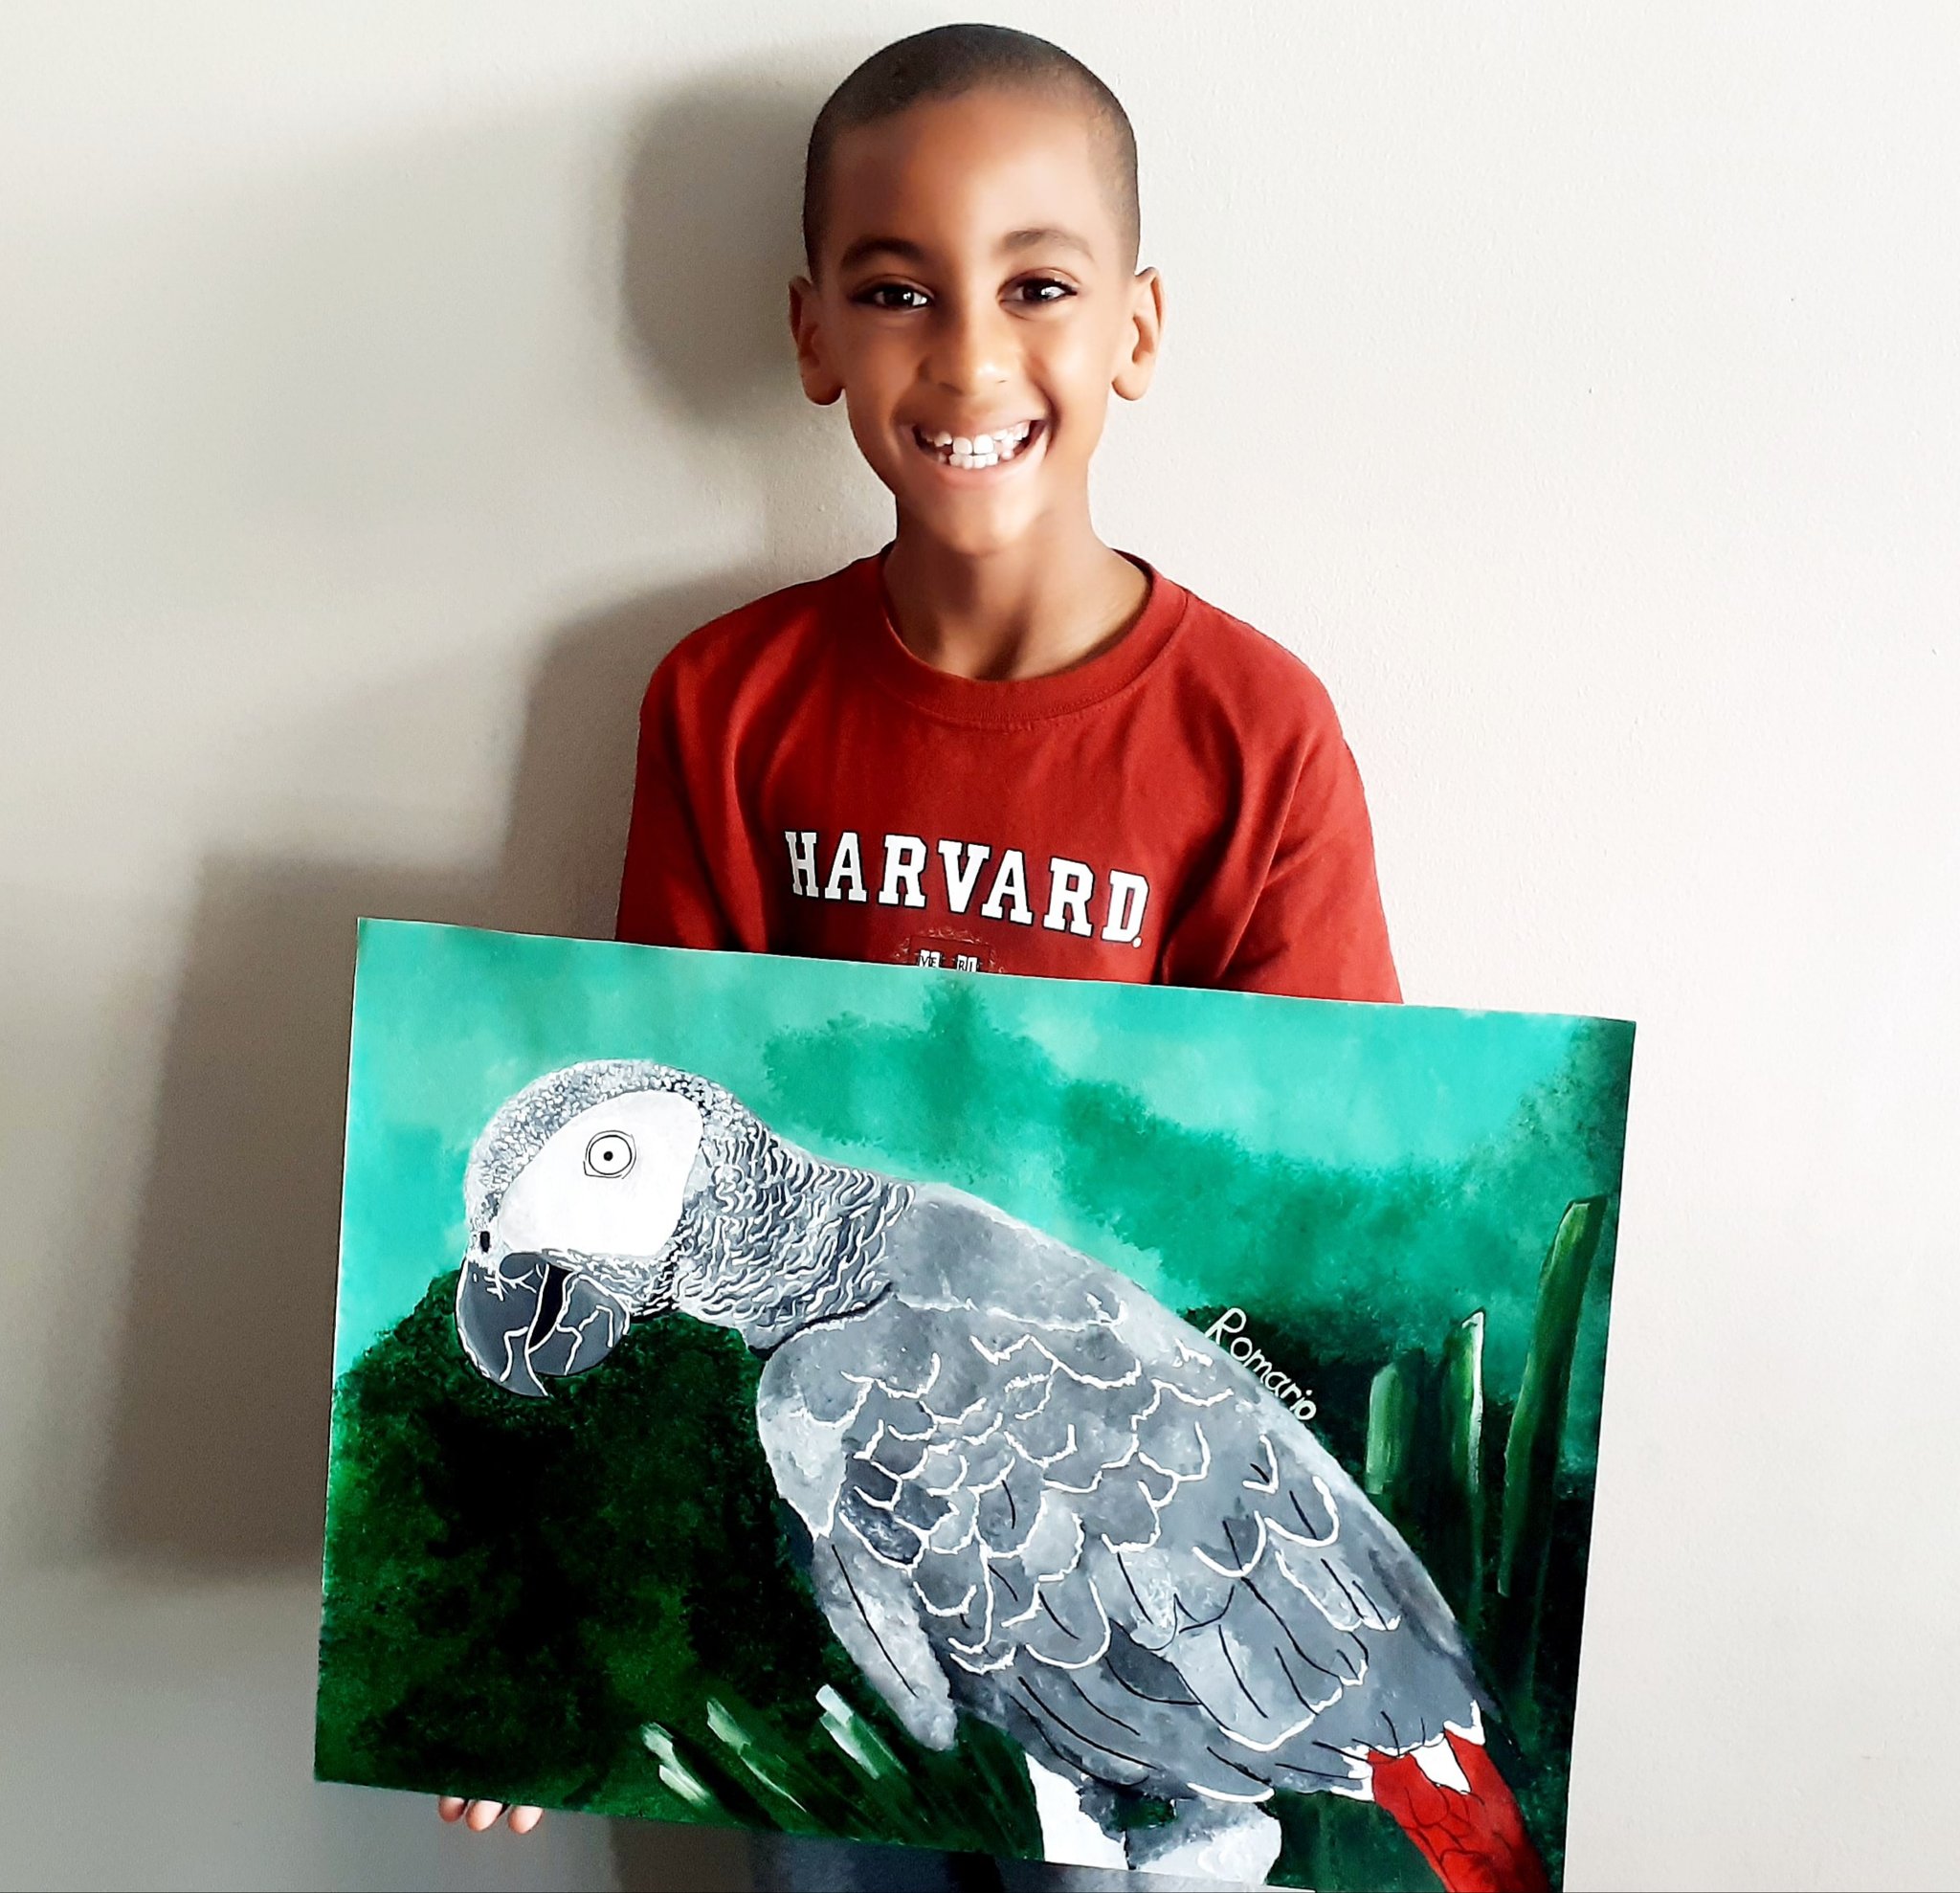 Romario Valentine and his parrot painting